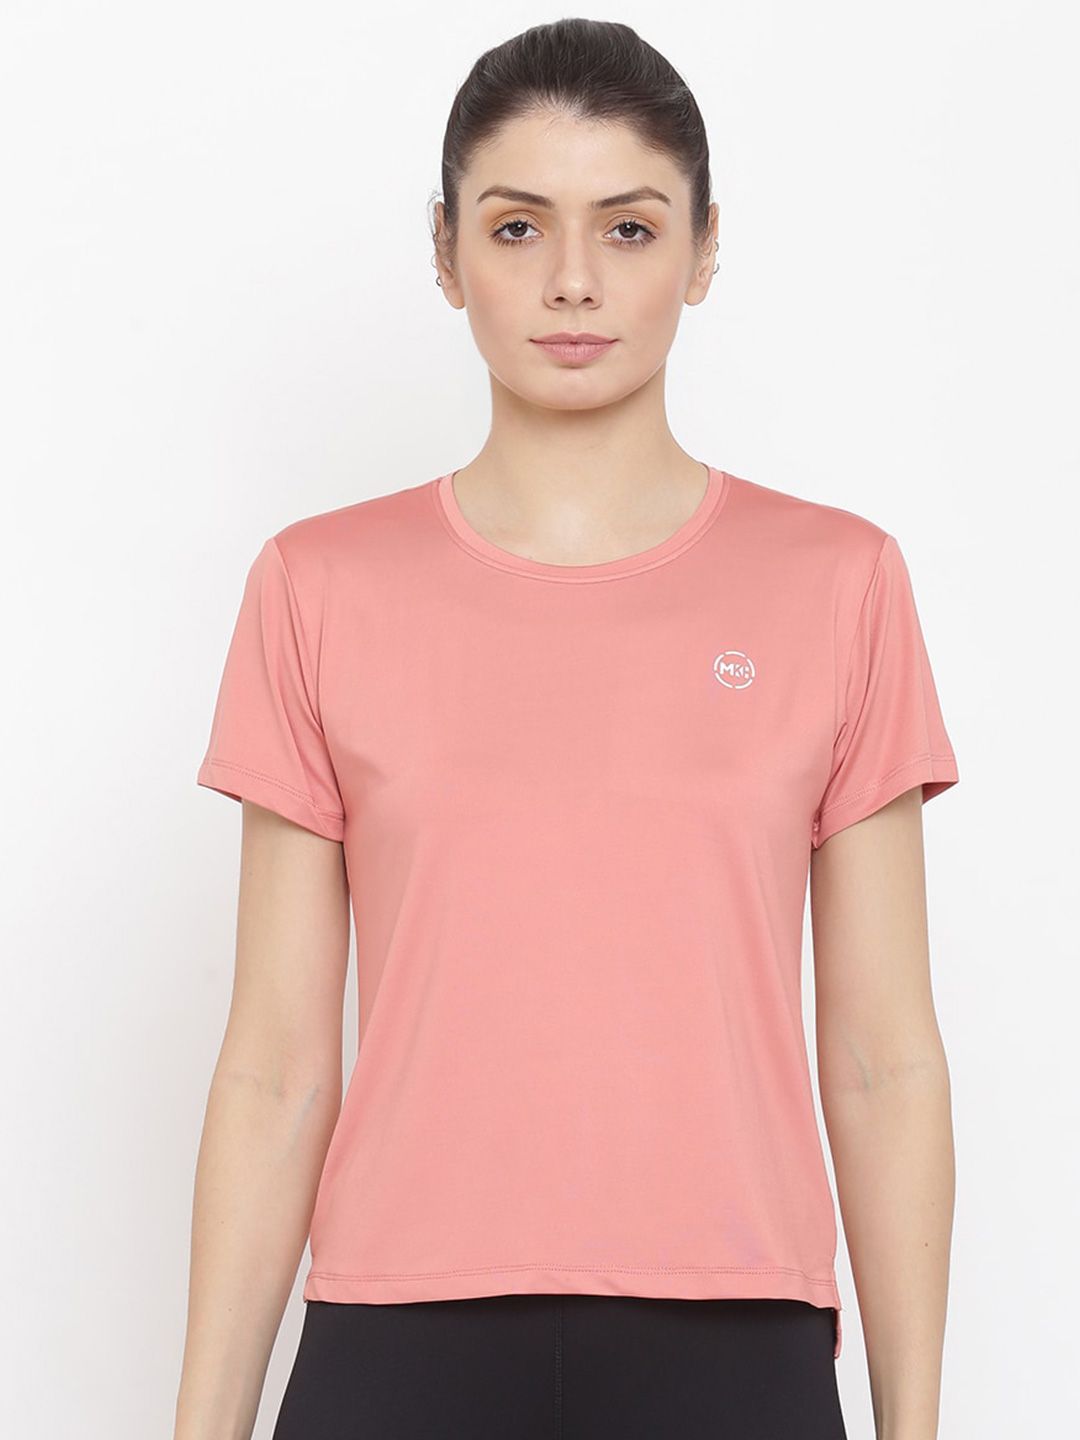 MKH Women Pink Dri-FIT  Sports T-shirt Price in India